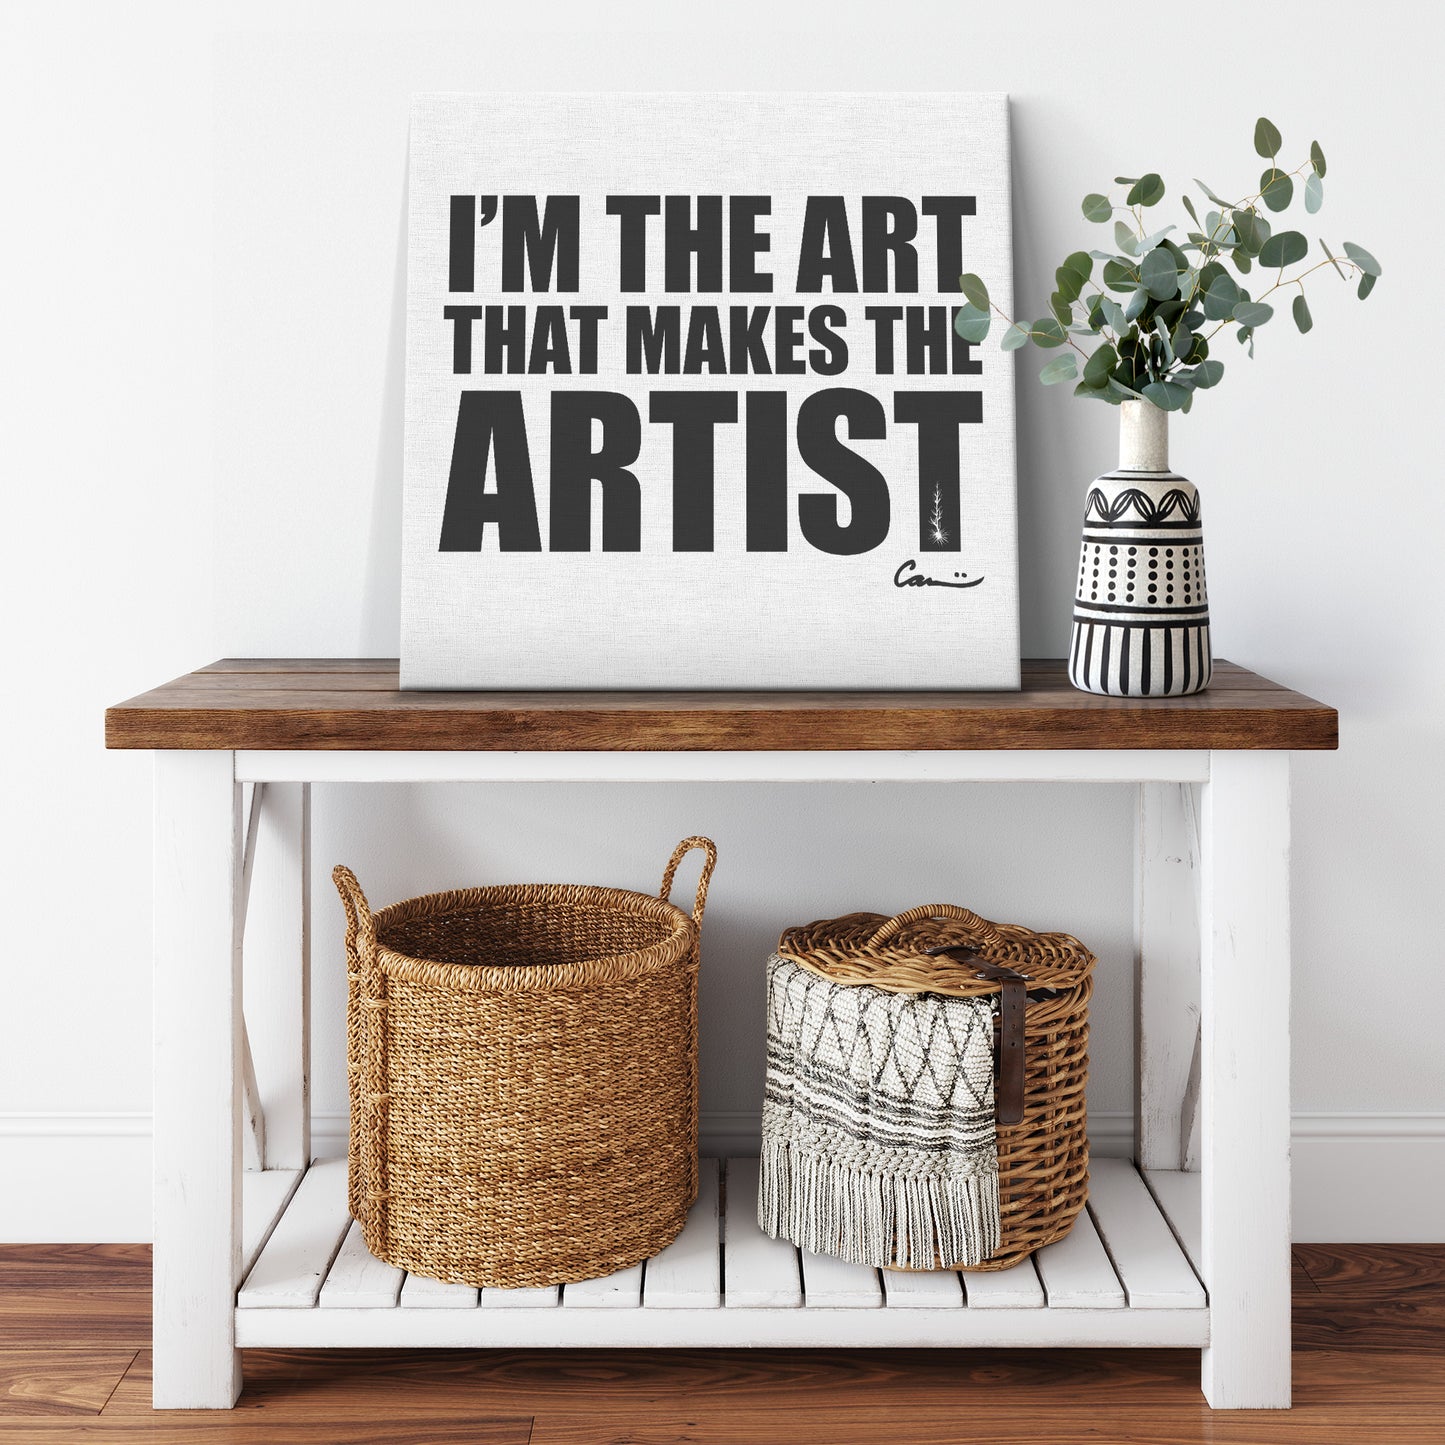 I'm the art that makes the artist - the very best art quotes and quote canvases from Carini Arts